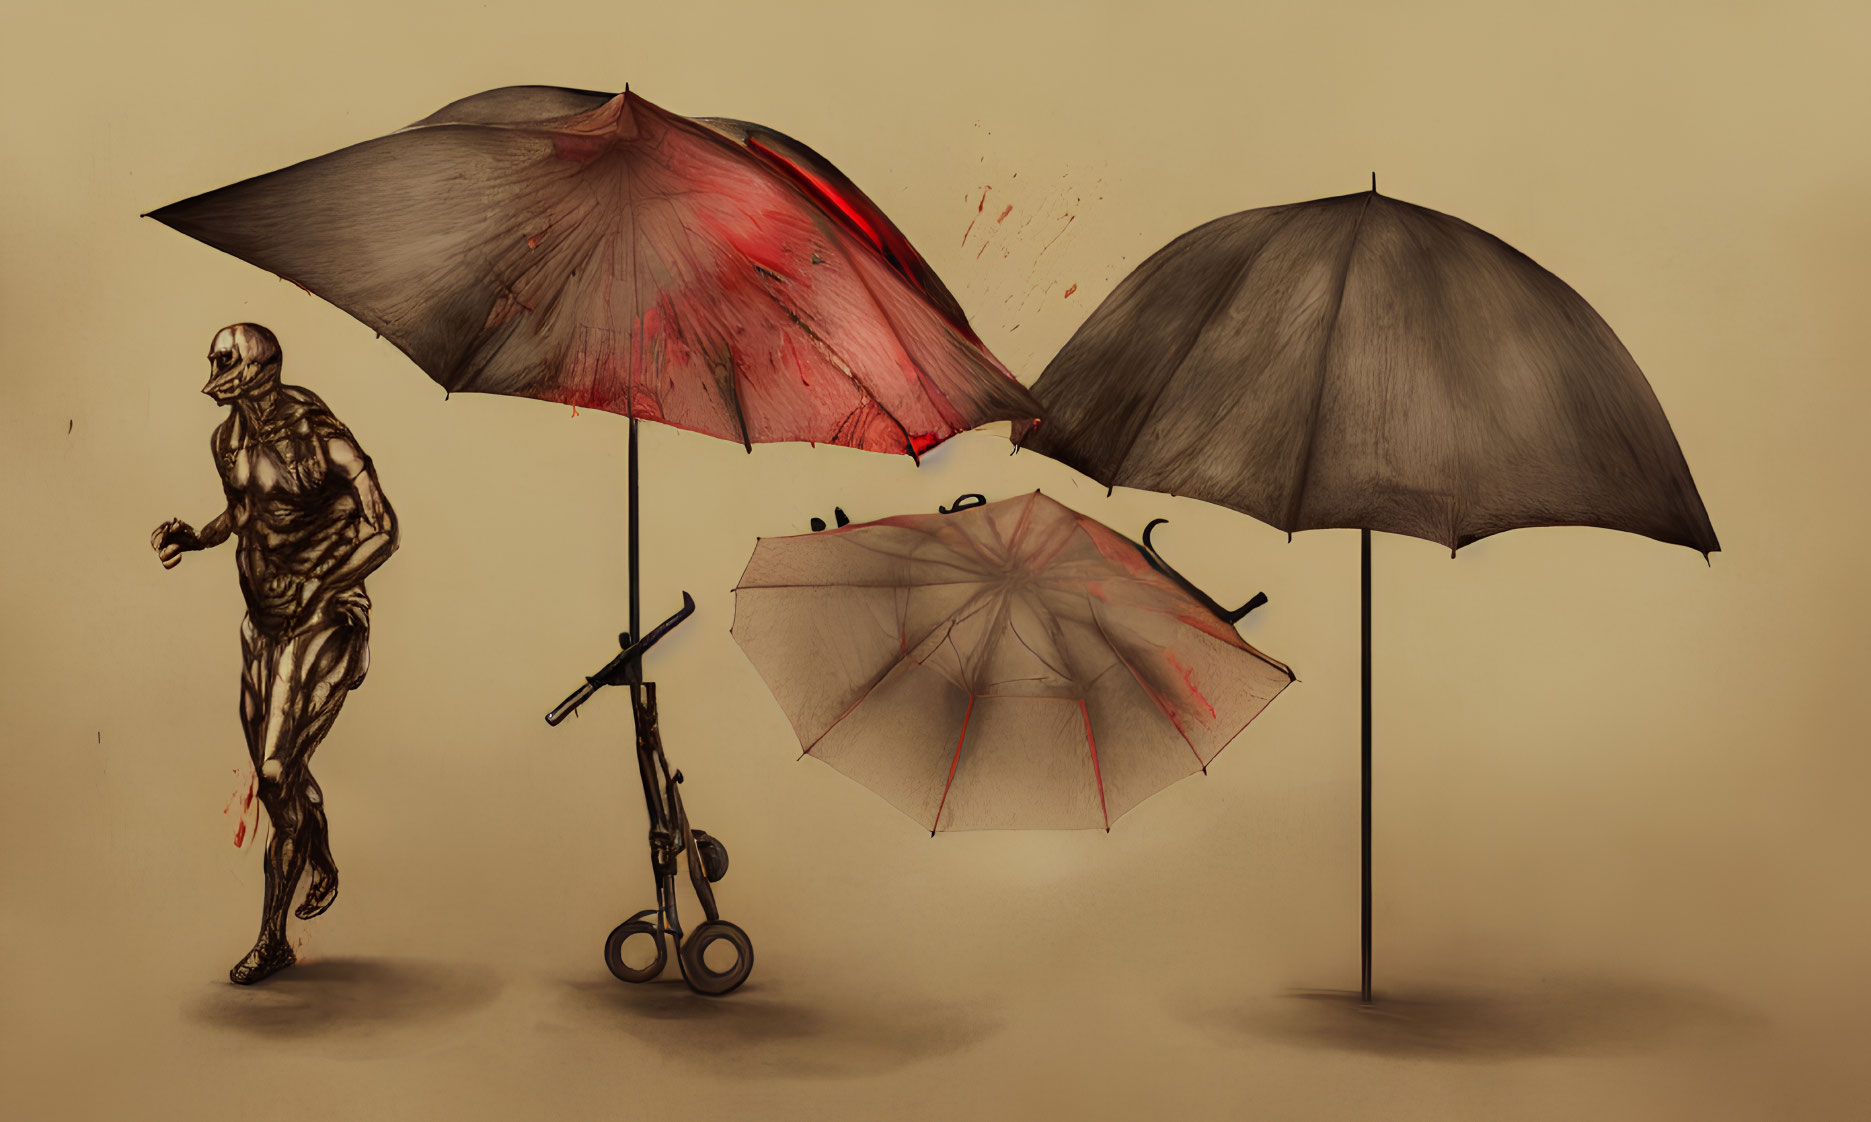 Sketch of humanoid figure running with splatter effect next to three umbrellas, two upright and one inverted